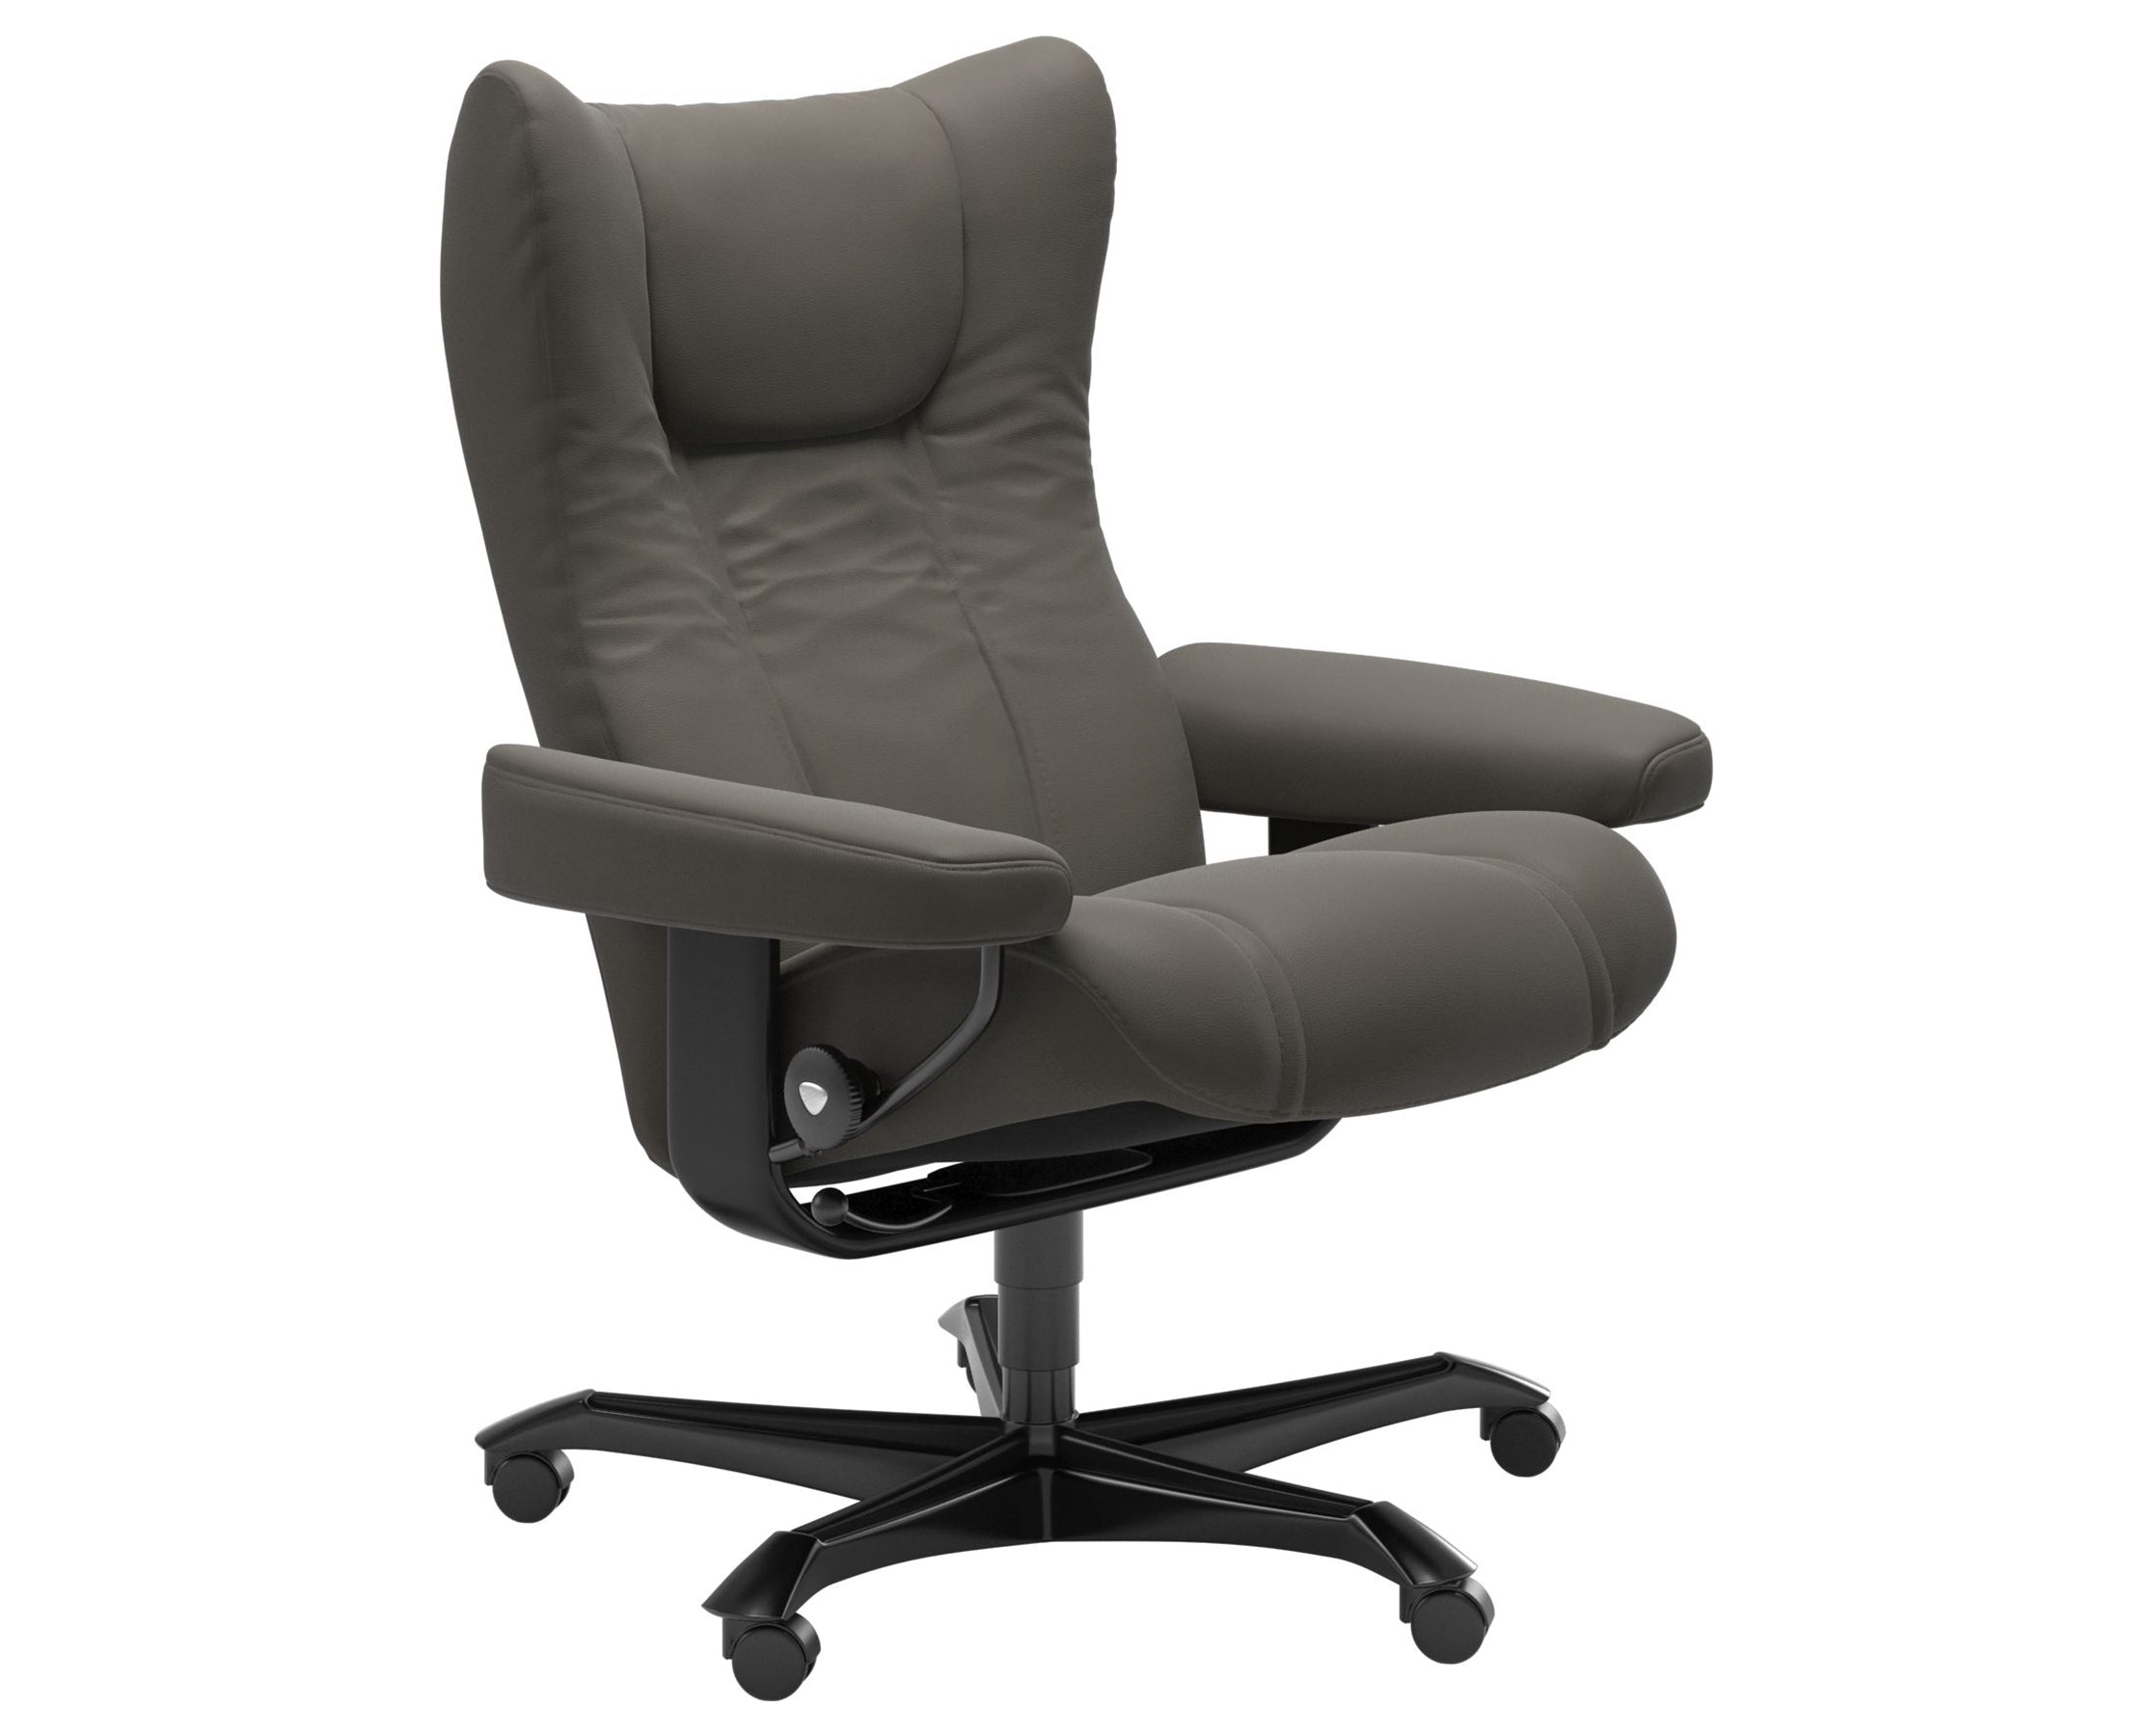 Paloma Leather Metal Grey M and Black Base | Stressless Wing Home Office Chair | Valley Ridge Furniture